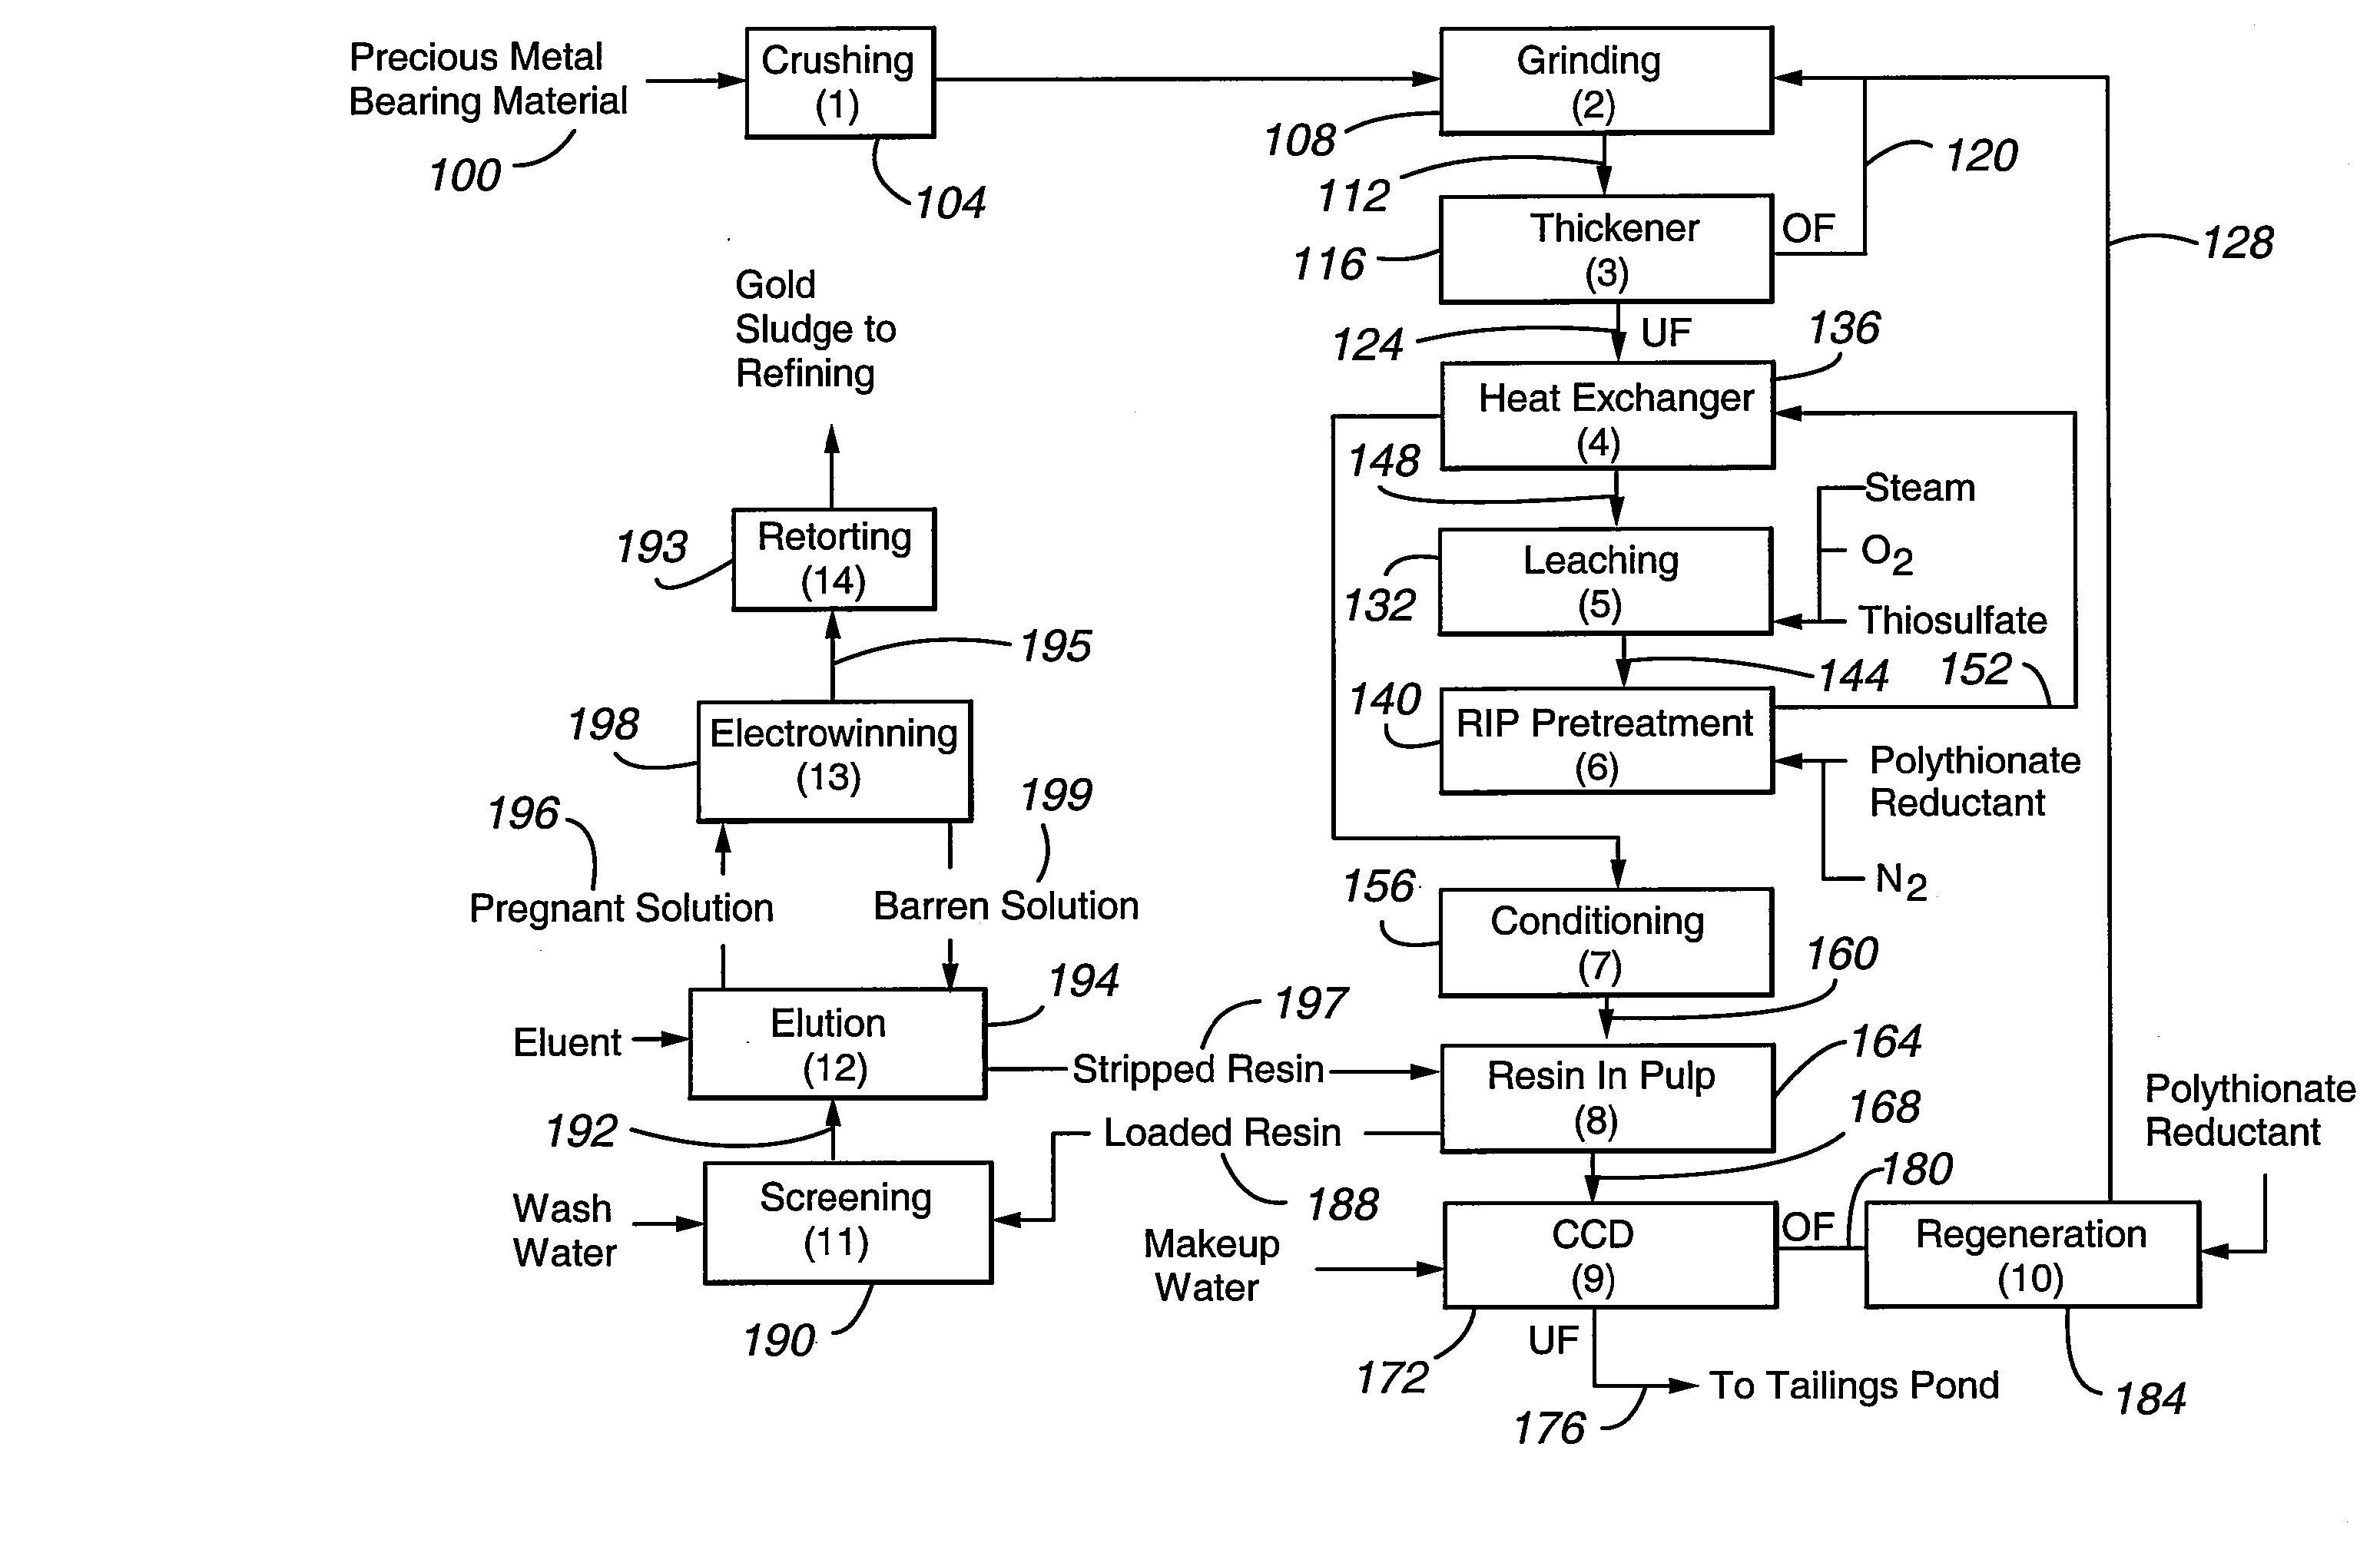 Method for thiosulfate leaching of precious metal-containing materials